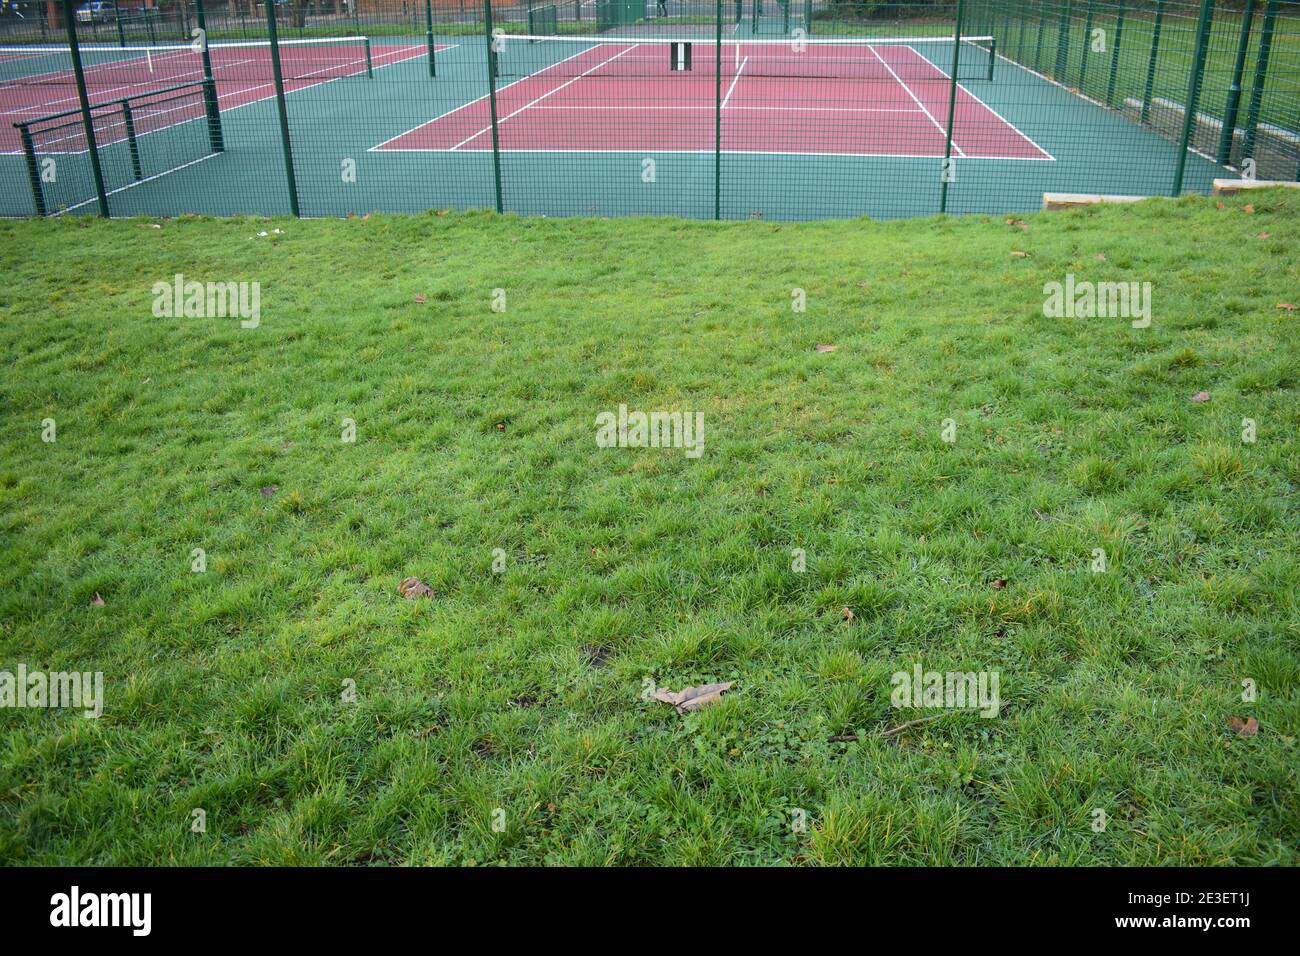 Hard tennis court is made of asphalt or concrete covered with acrylic to seal the top mark lines and provide better ground for player bounce and speed Stock Photo